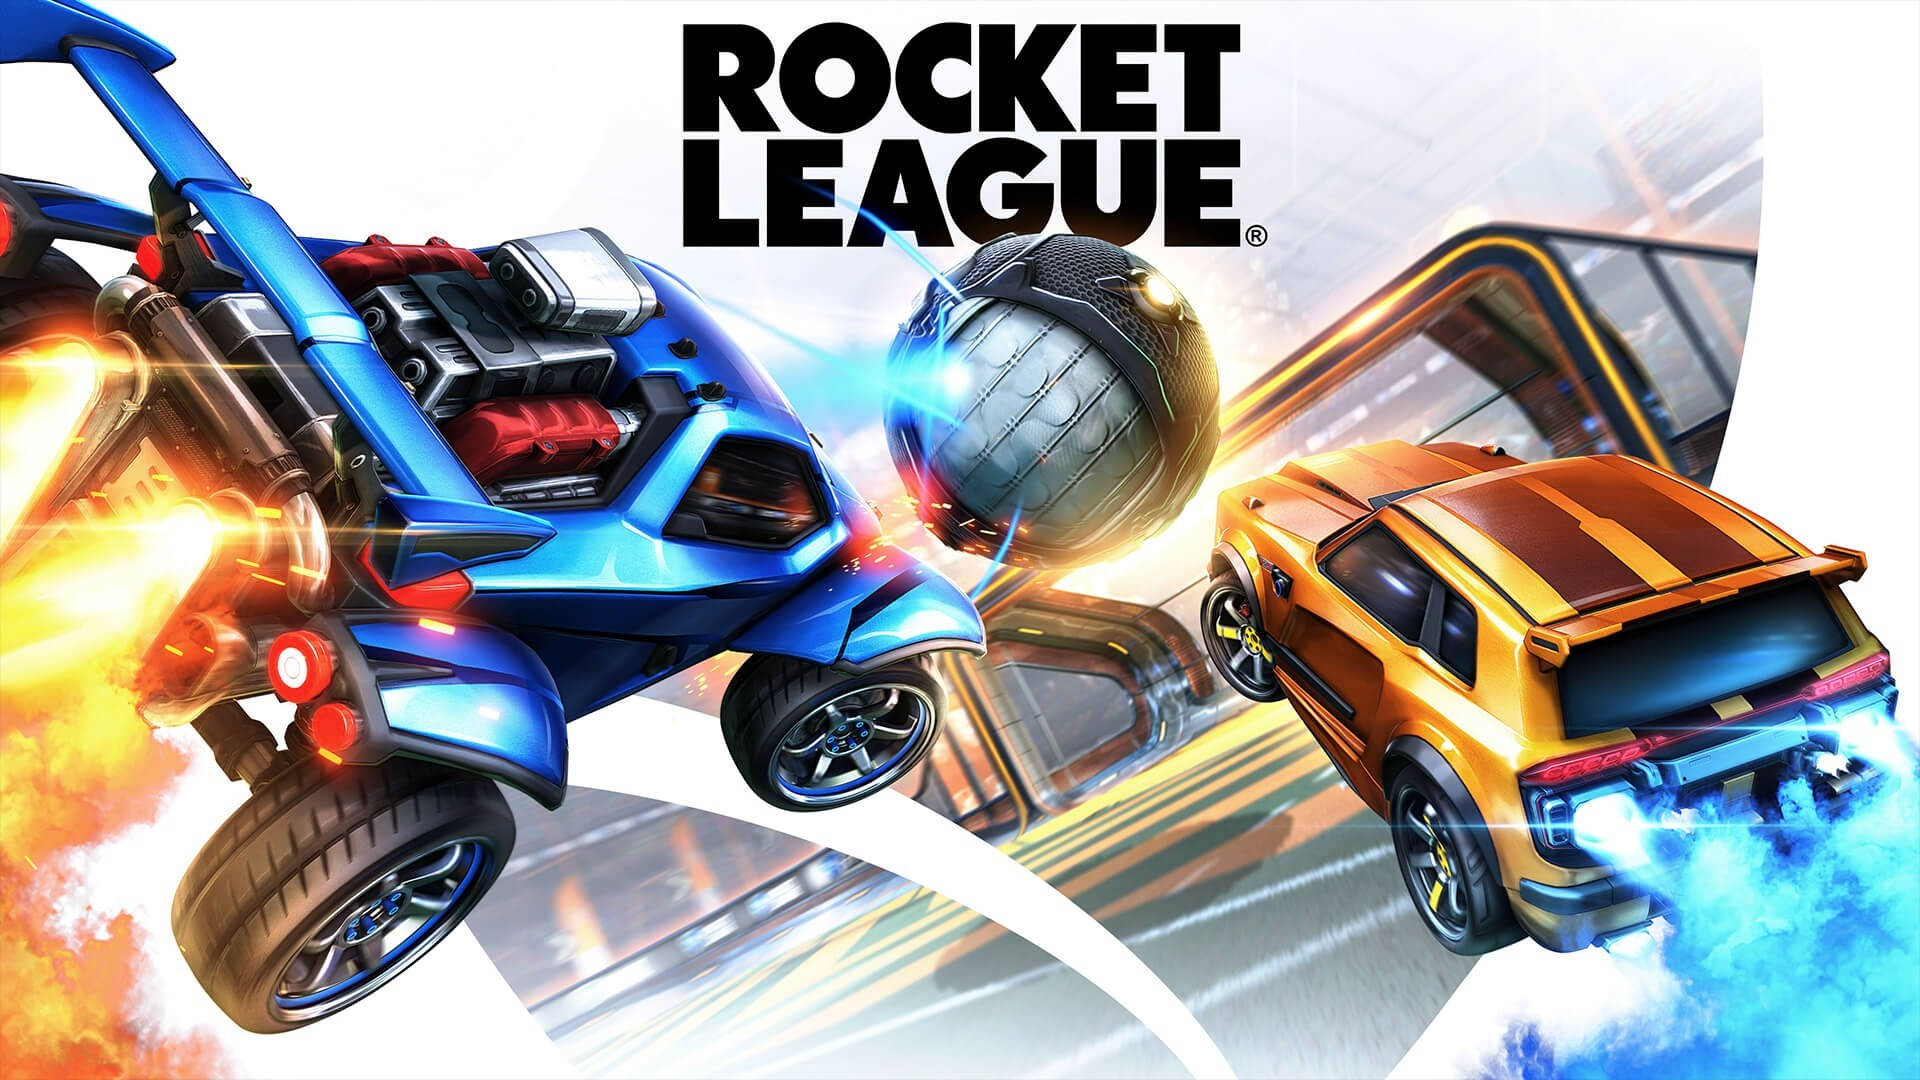 Cool Rocket League Blue And Yellow Cars Background